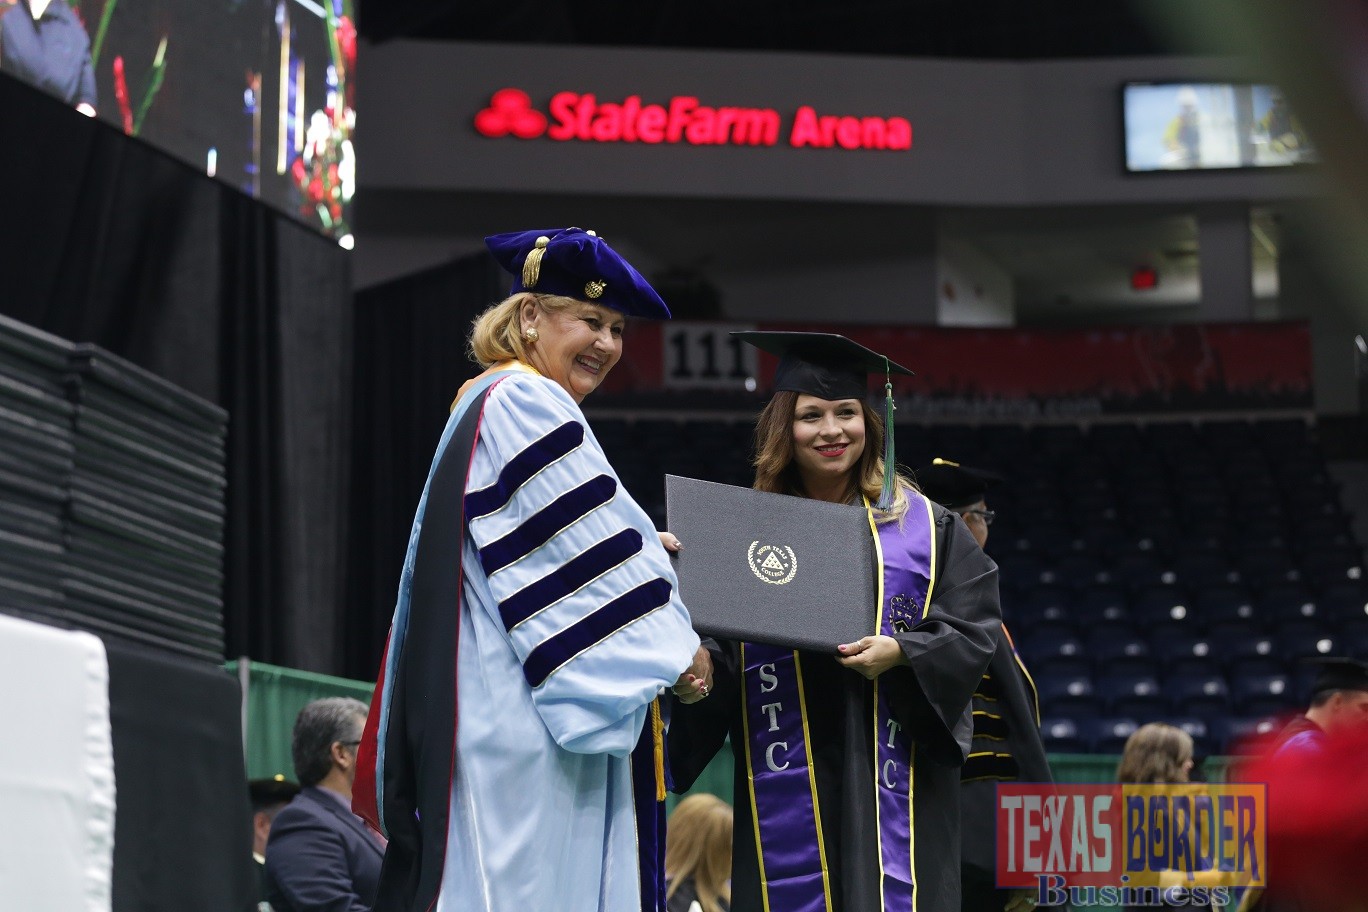 STC President Dr. Shirley A. Reed awards a diploma to a Bachelor Program student during the first commencement ceremony on Saturday, December 12. Photo by South Texas College - Ben Briones